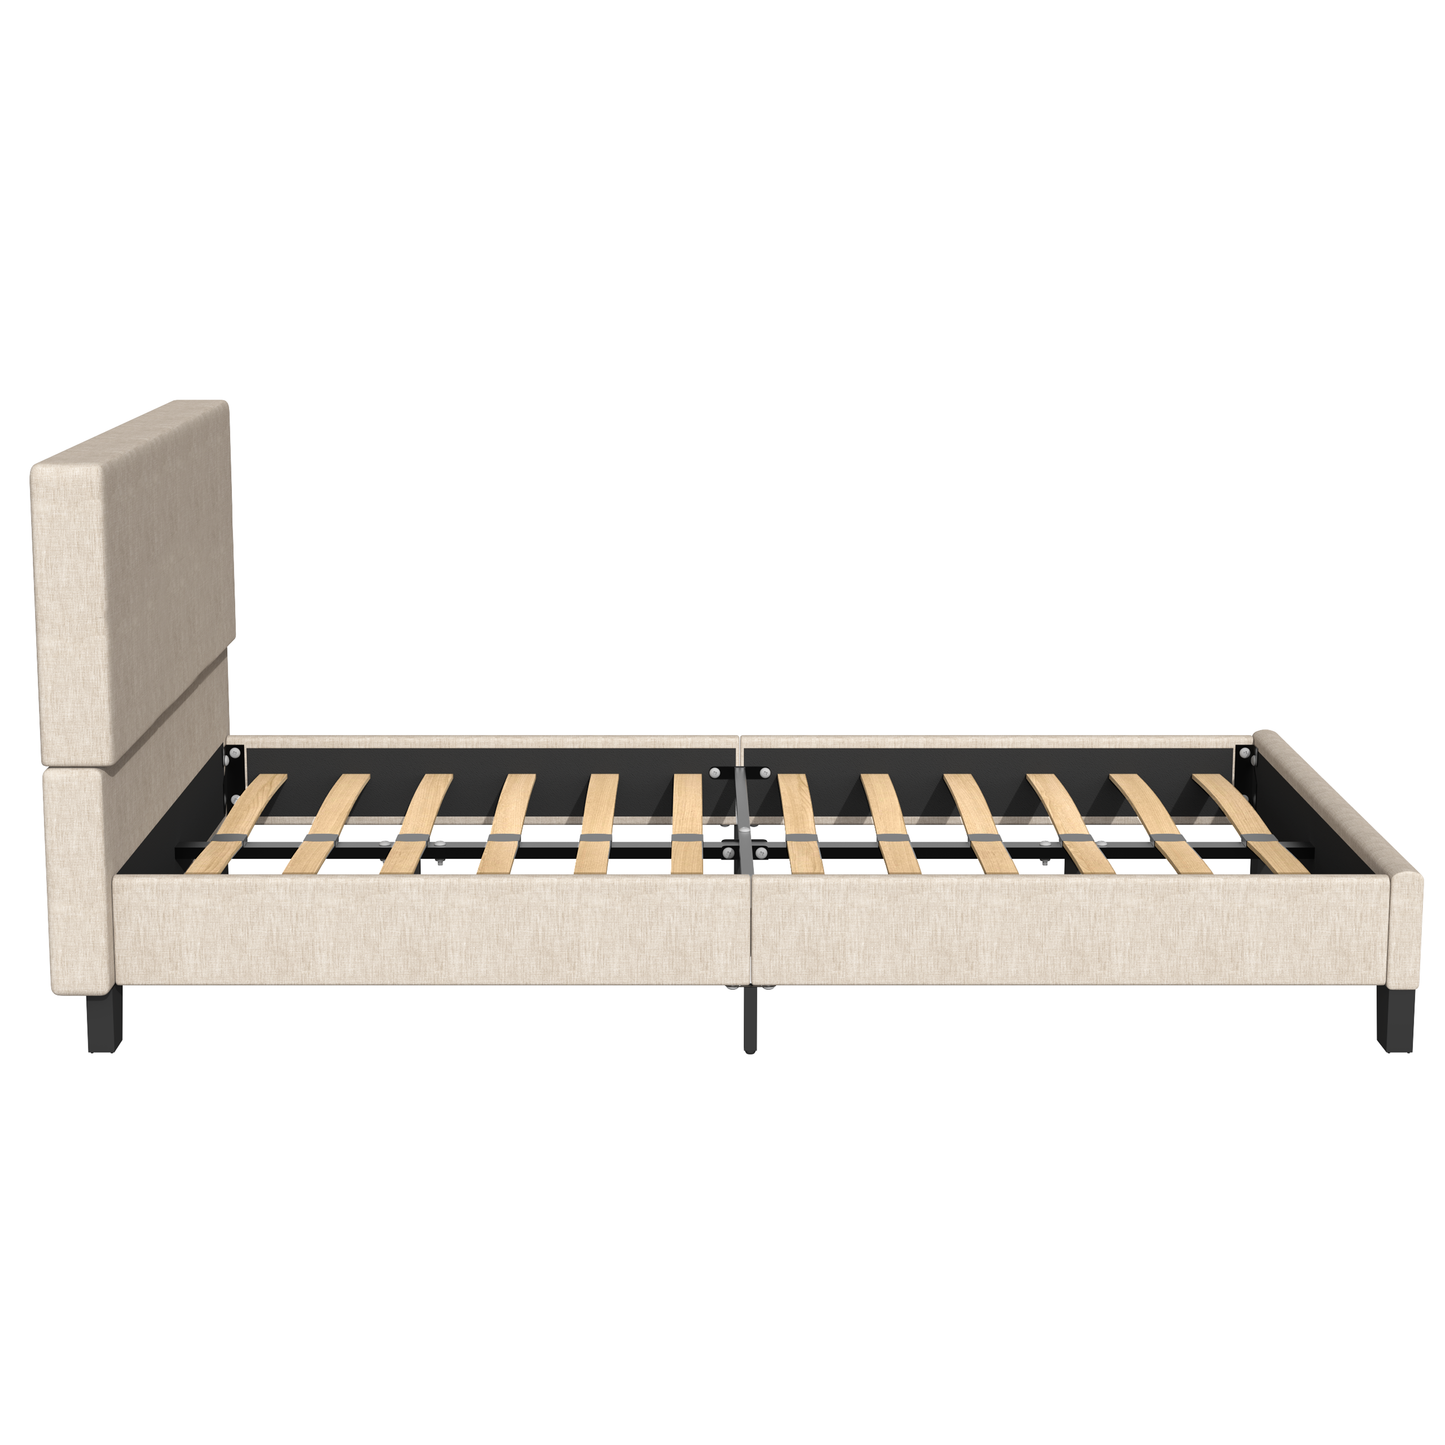 SYNGAR Beige Fabric Upholstered Platform Bed Frame Twin Size with Elegant Headboard, Metal Frame Bedroom Furniture with Strong Wooden Slat Support, No Box Spring Needed, Easy Assembly